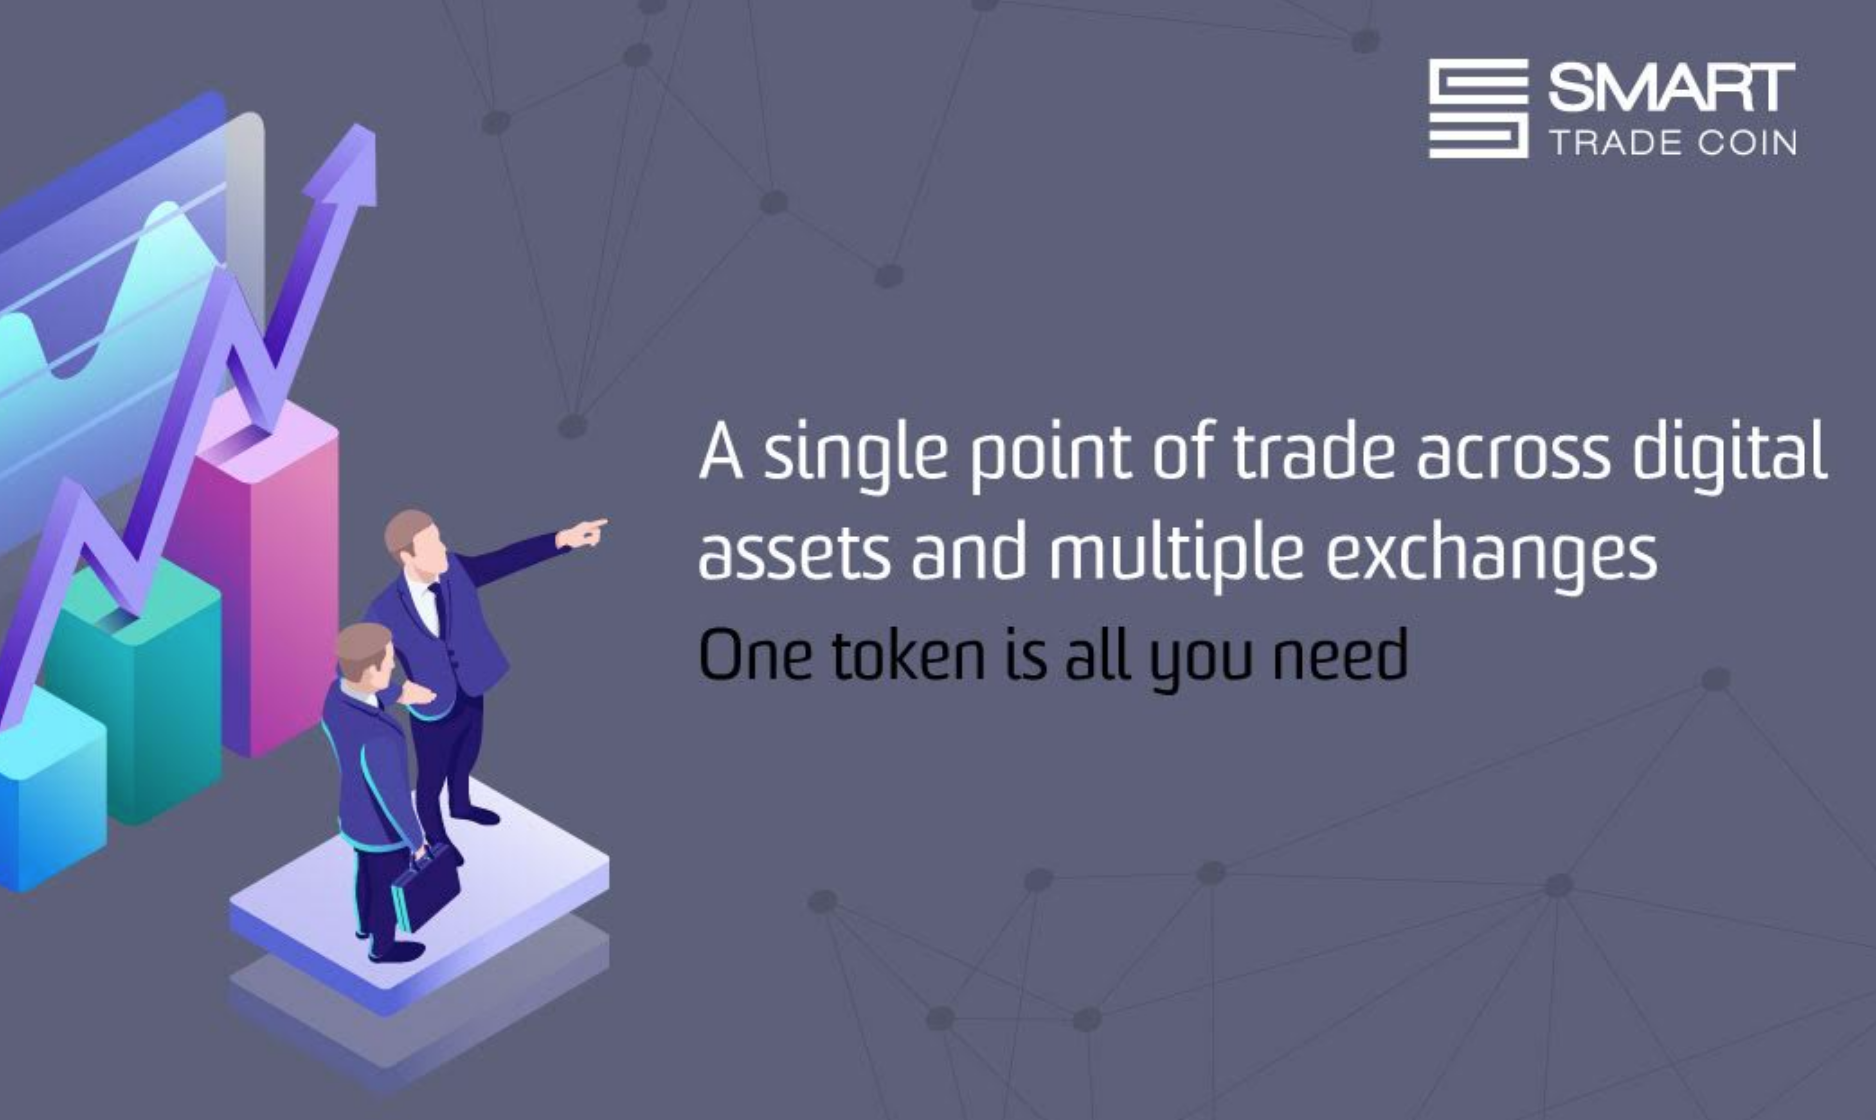 A single point of trade across digital assets and multiple exchanges – One token is all you need